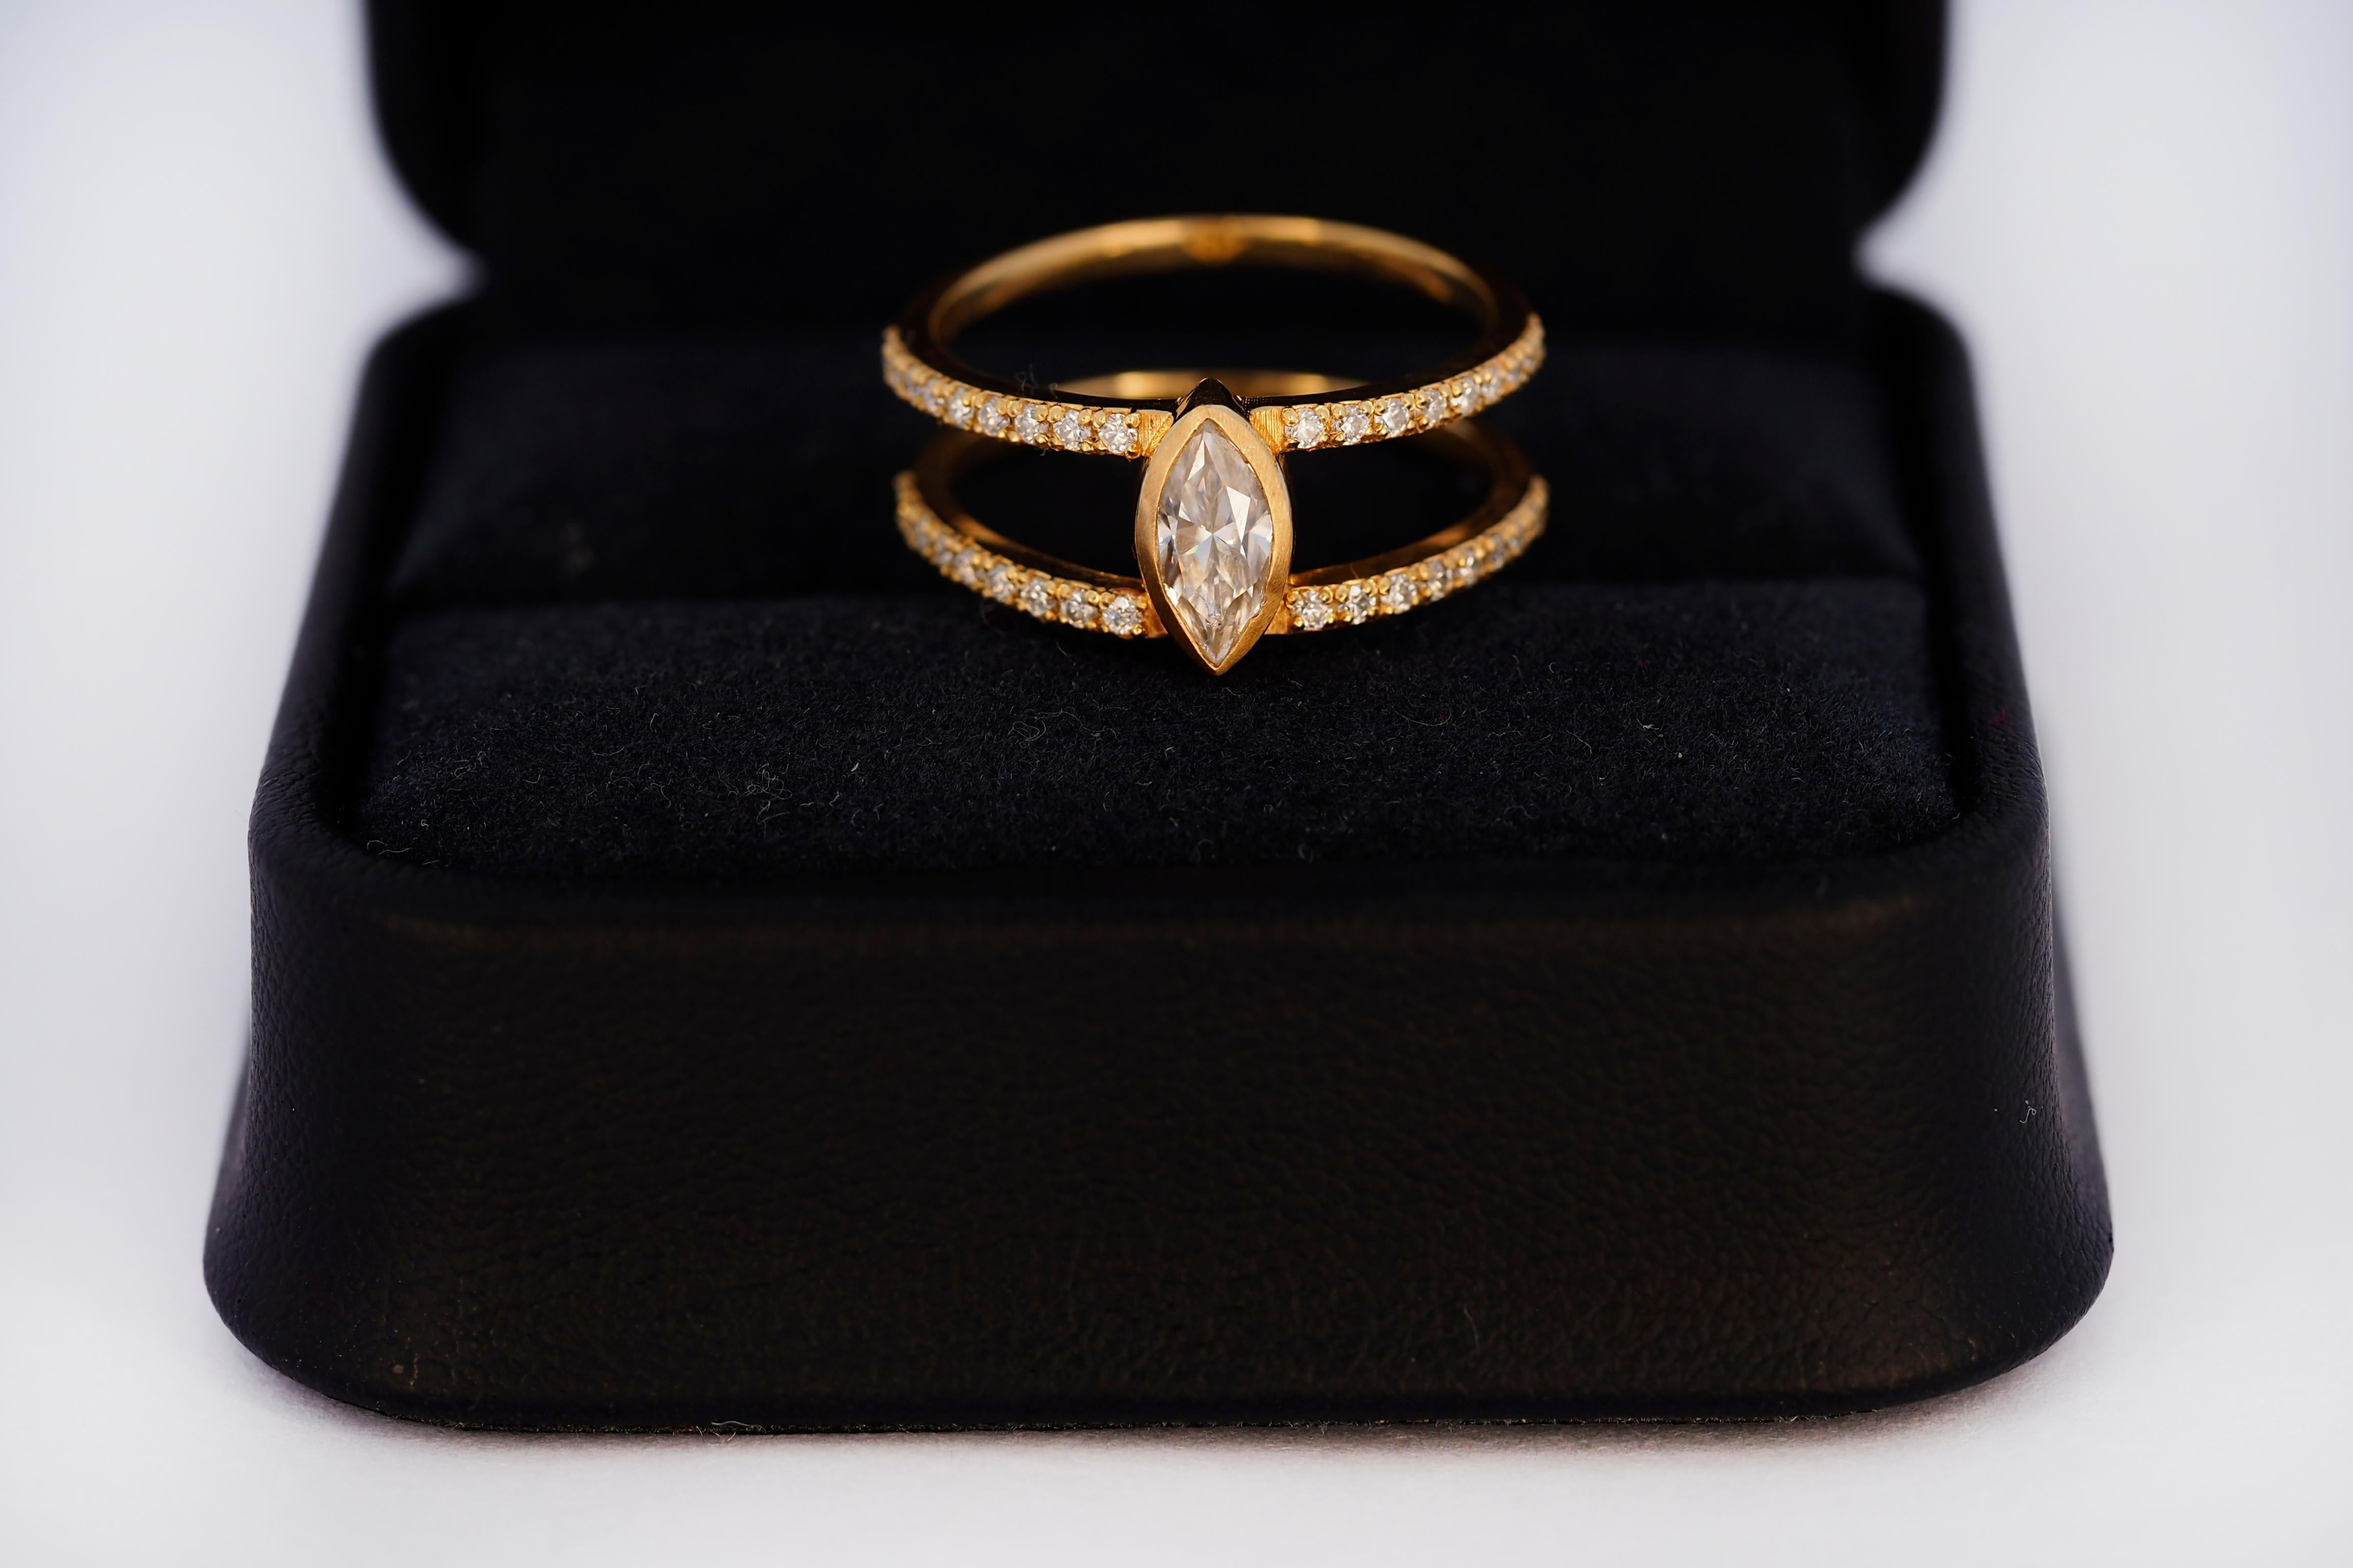 1 ct Marquise moissanite engagement ring in 14k gold. 14K Gold Double Shank Marquise Solitaire Wedding Ring. 14k Gold Moissanite Half Eternity Ring. Stacked Moissanite Ring.  Bezel set moissanite ring. Double Band Engagement Ring.

Metal: 14k